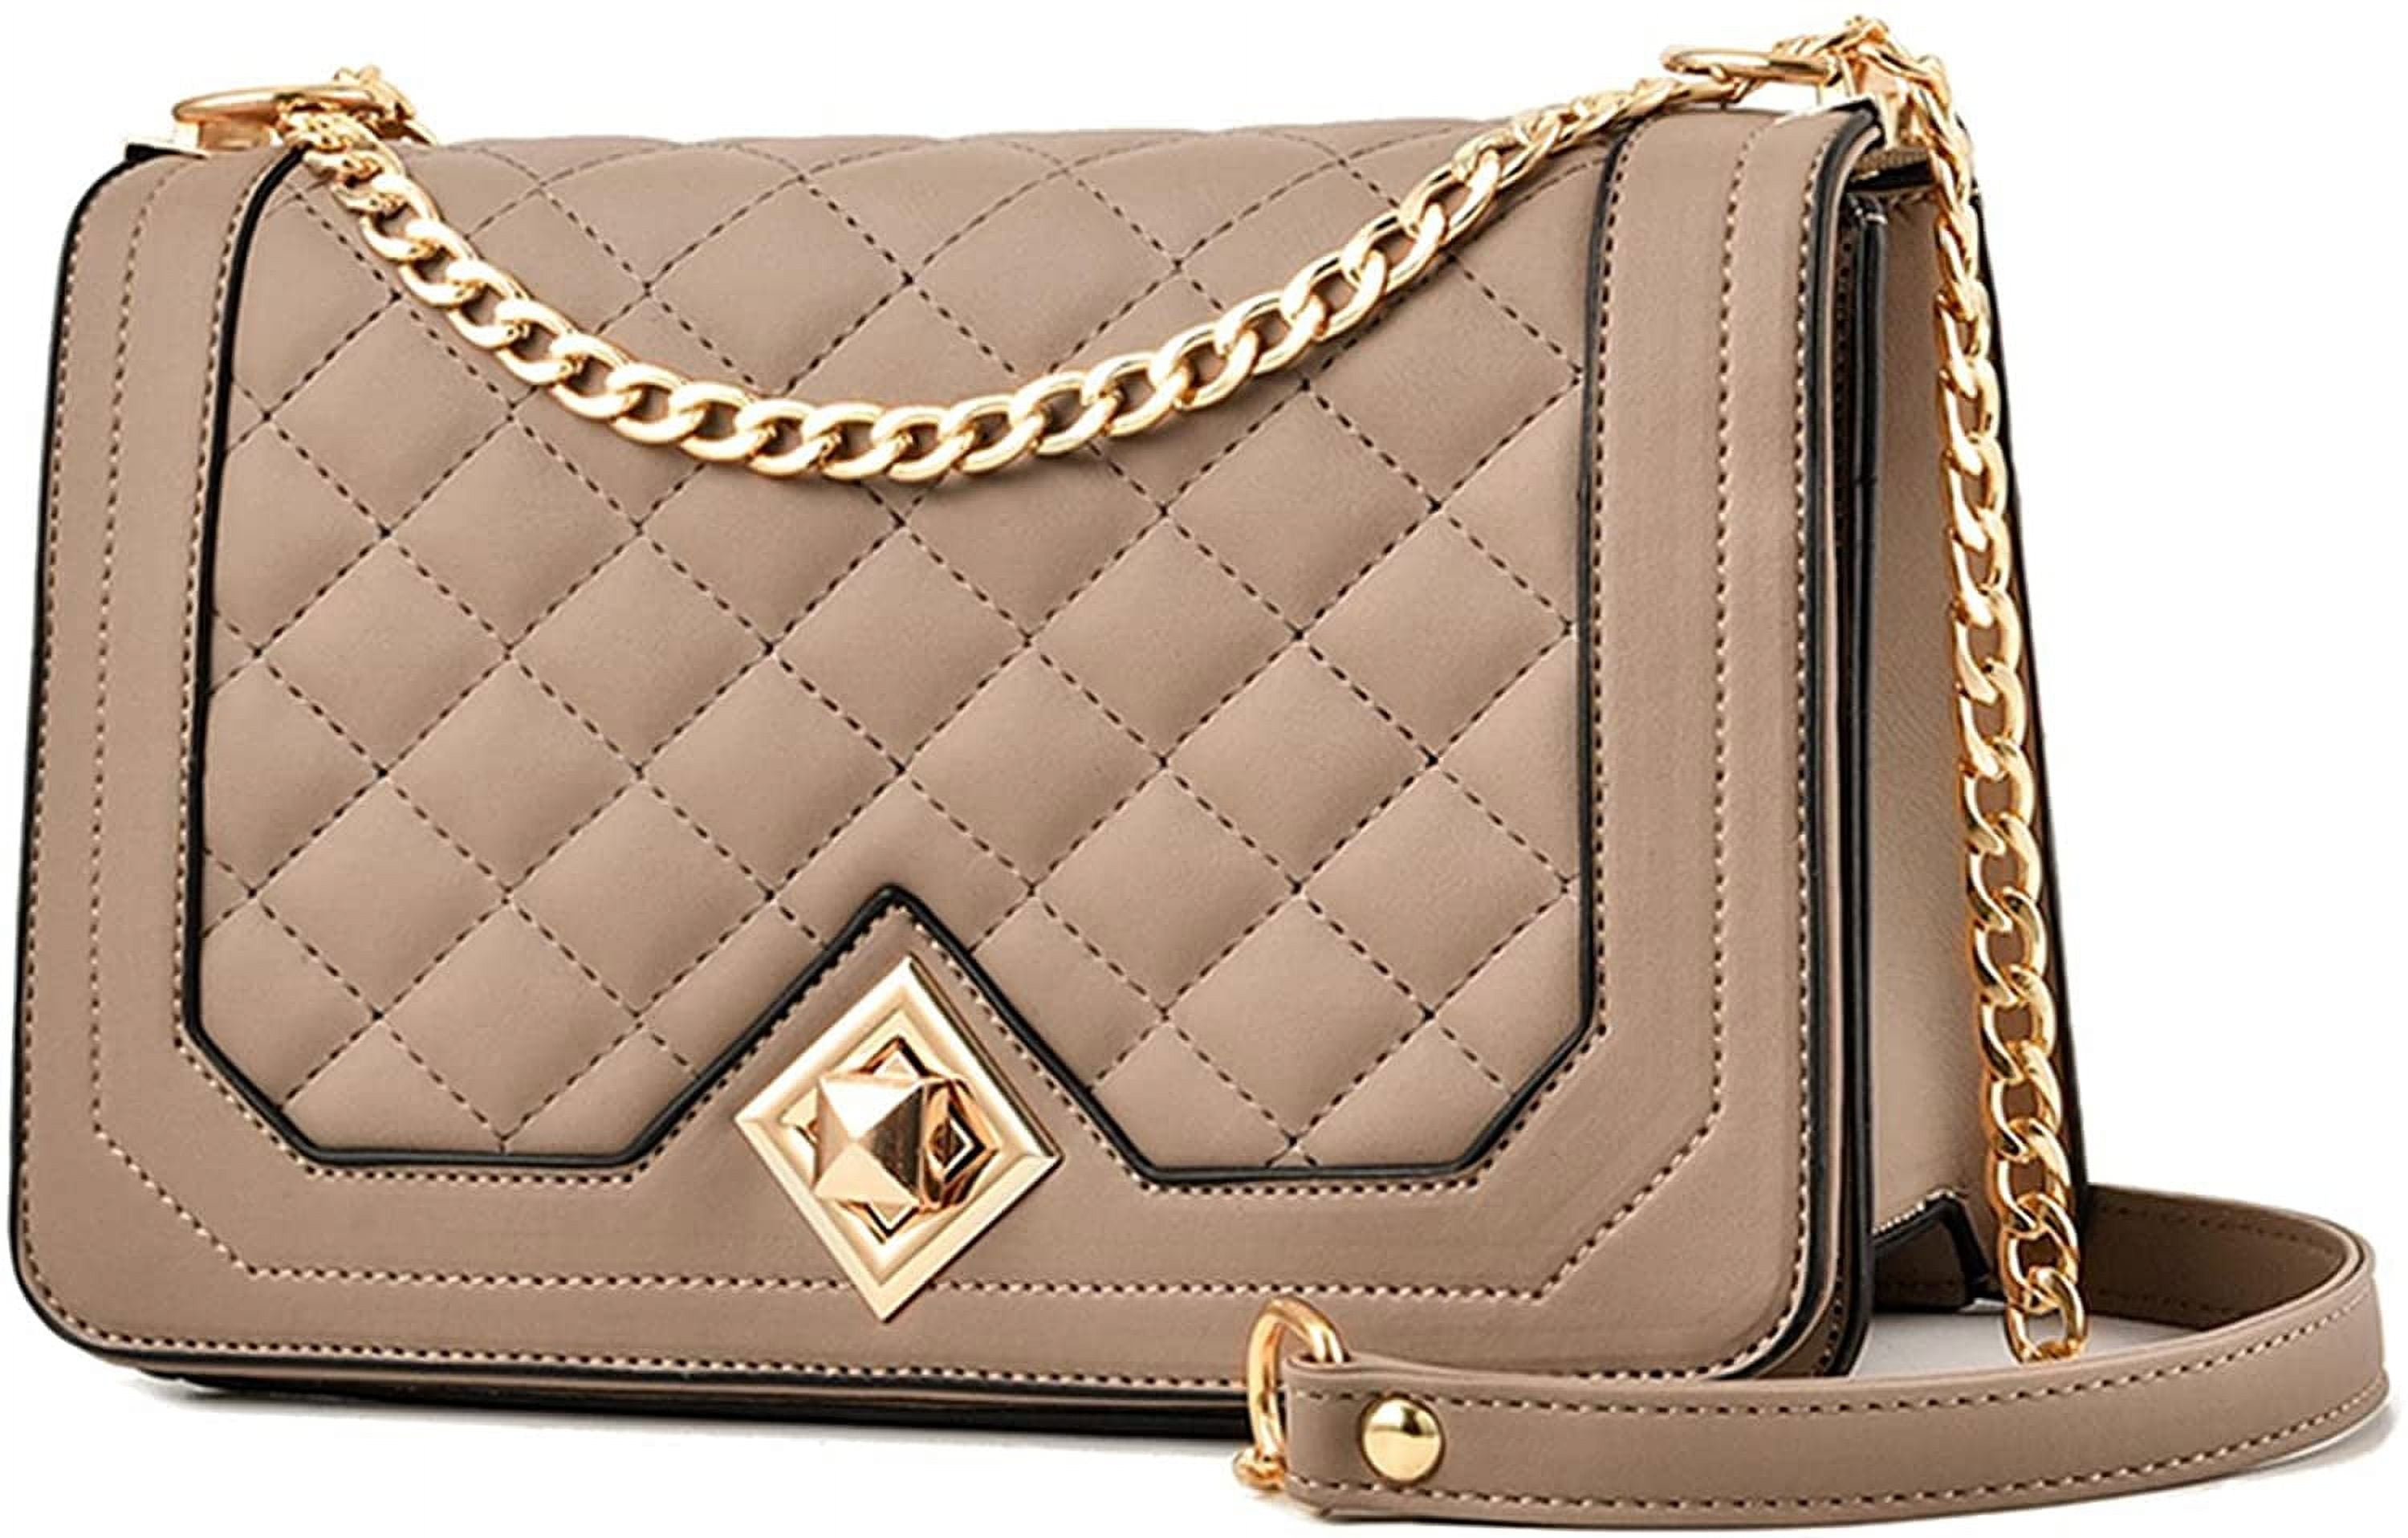 Tancuzo Crossbody Bags for Women Small Handbags PU Leather Shoulder Bag  Ladies Quilted Purse Evening Bag,Khaki